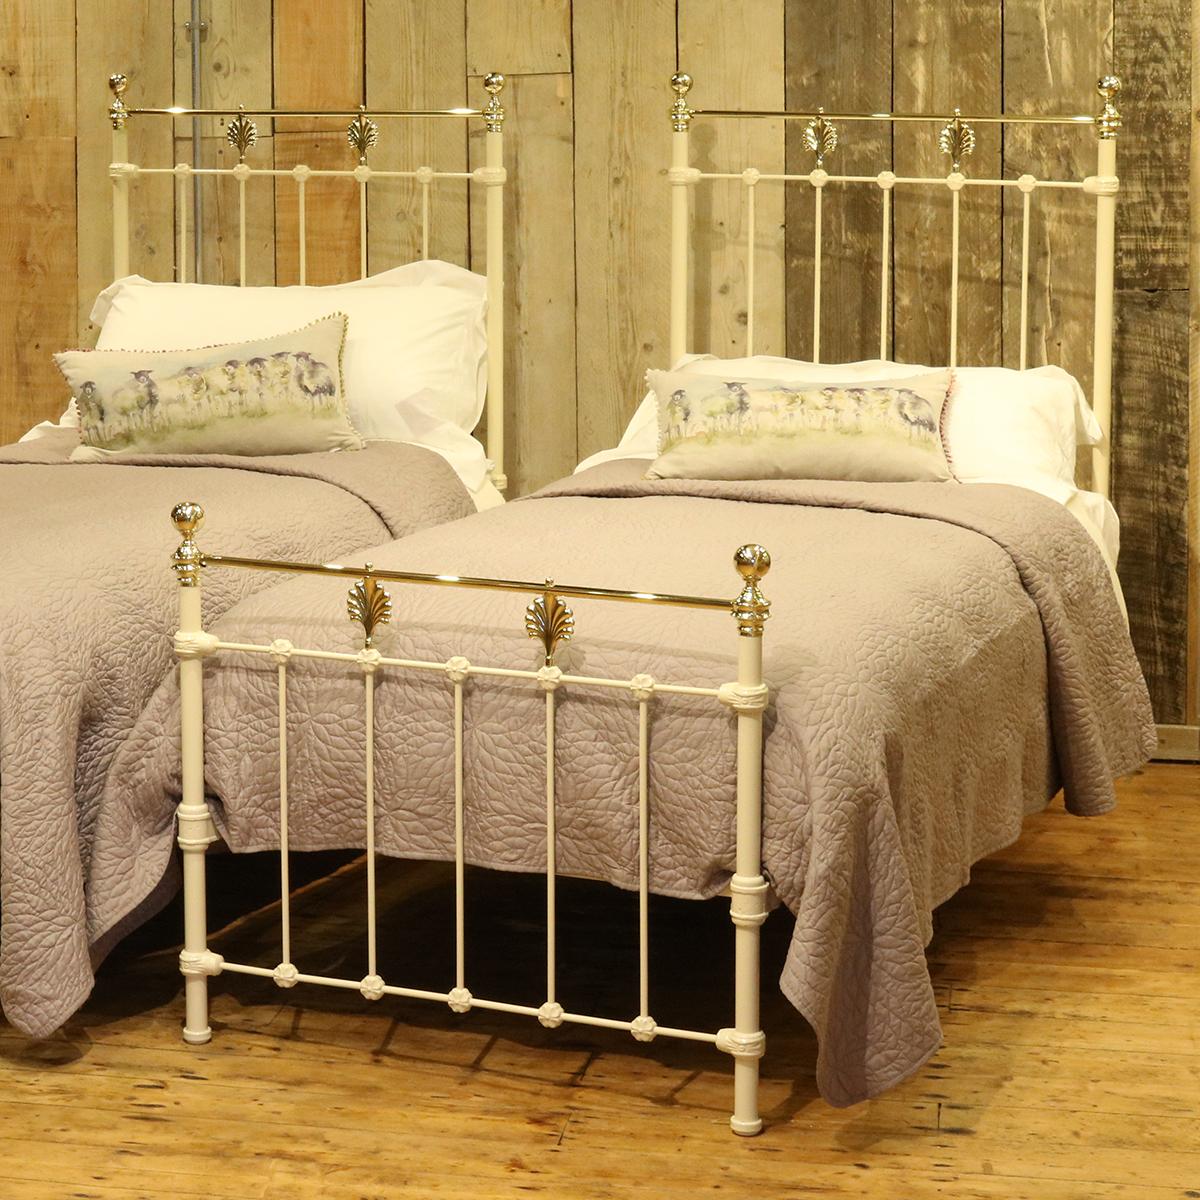 A matching pair of twin brass and iron beds finished in cream with brass leaf decoration.

These beds accept 3ft wide (36 inch or 90 cm) bases and mattresses.
The length can be 75 inches, 78 inches or more if required.
These beds can be joined